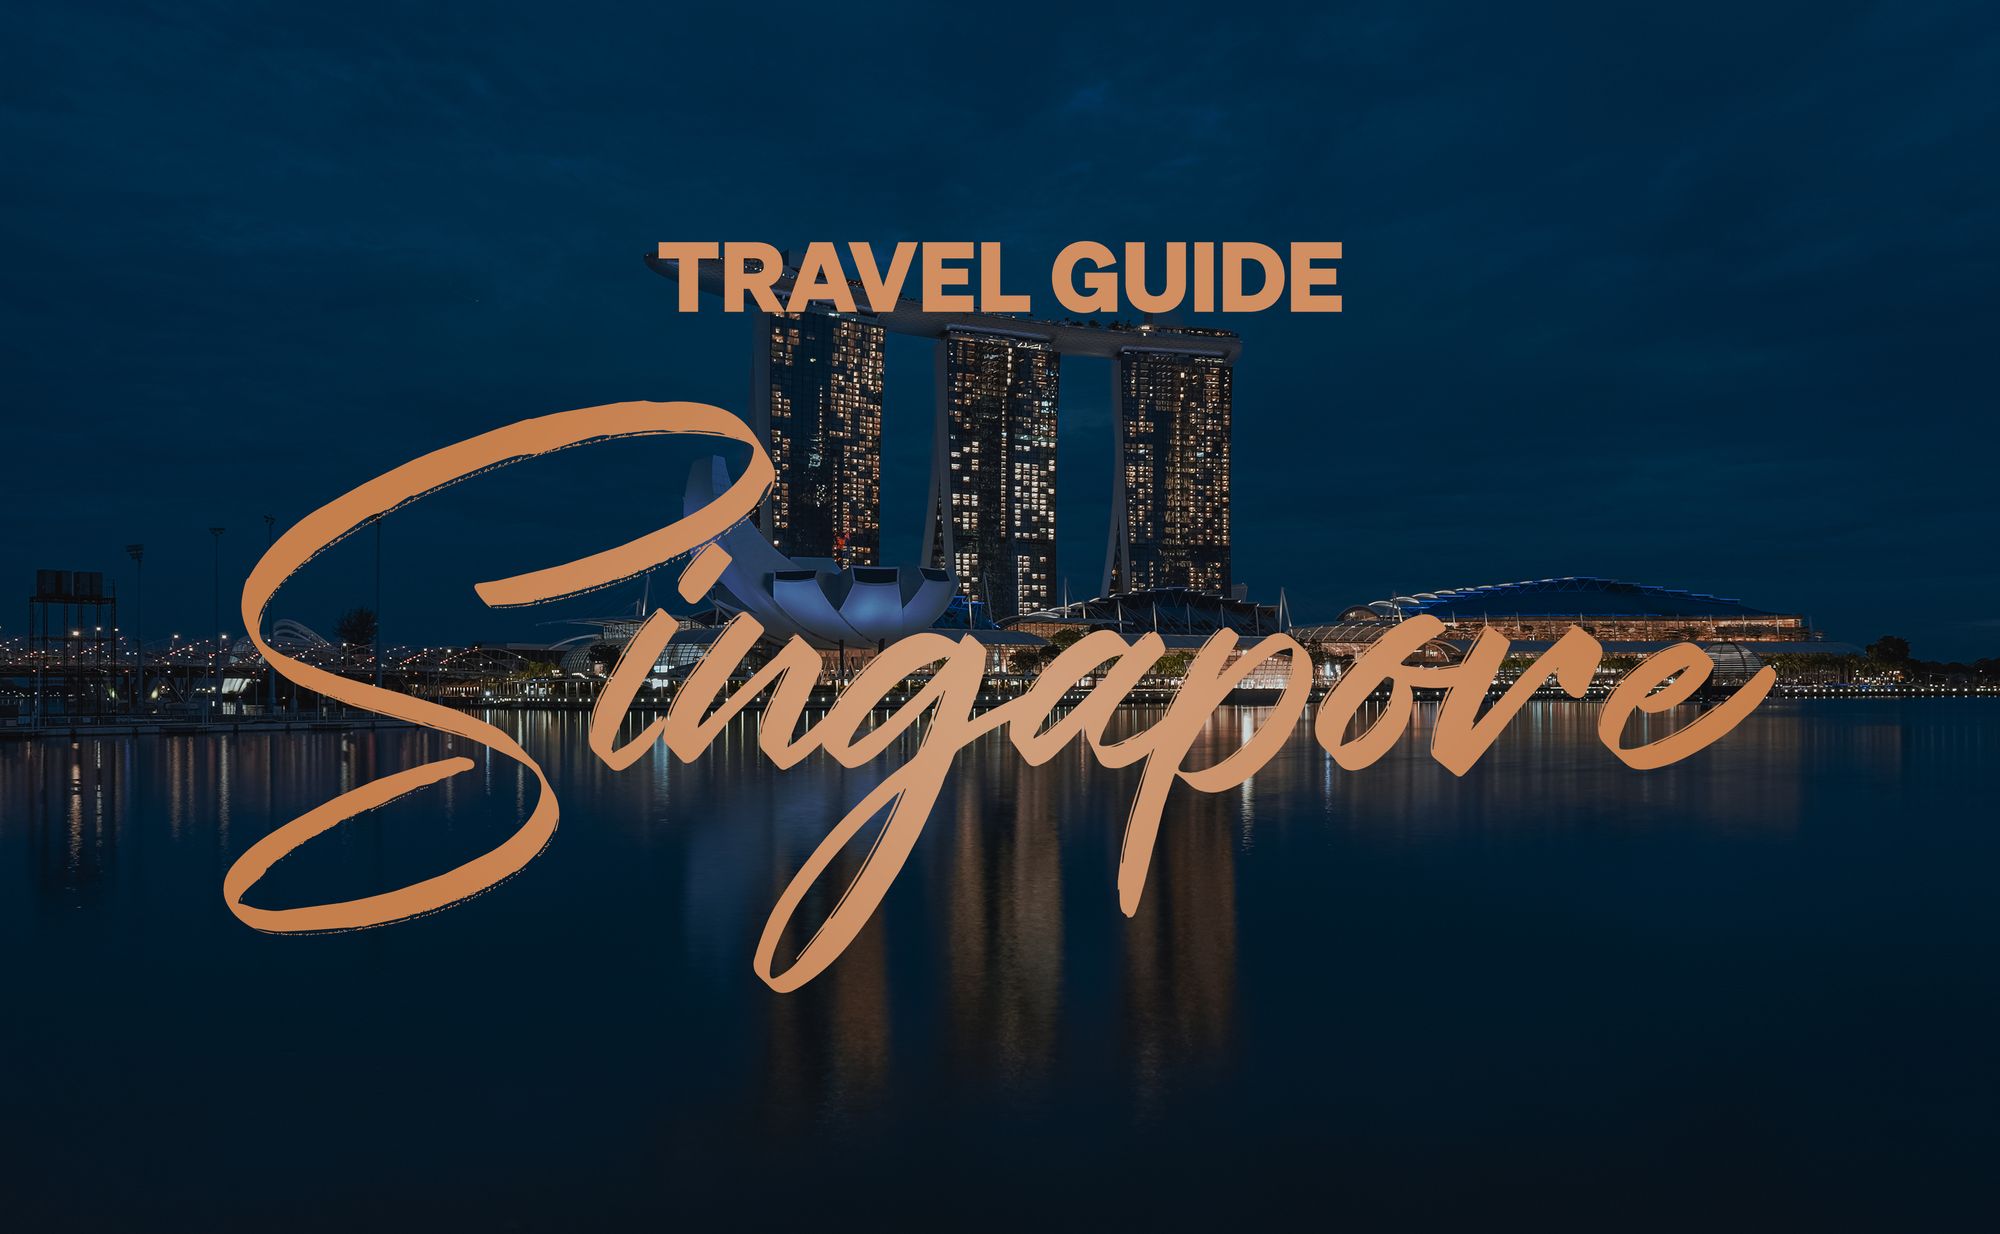 Changi Airport Guide: All You Need to Know About Singapore's Famous Airport  - Klook Travel Blog